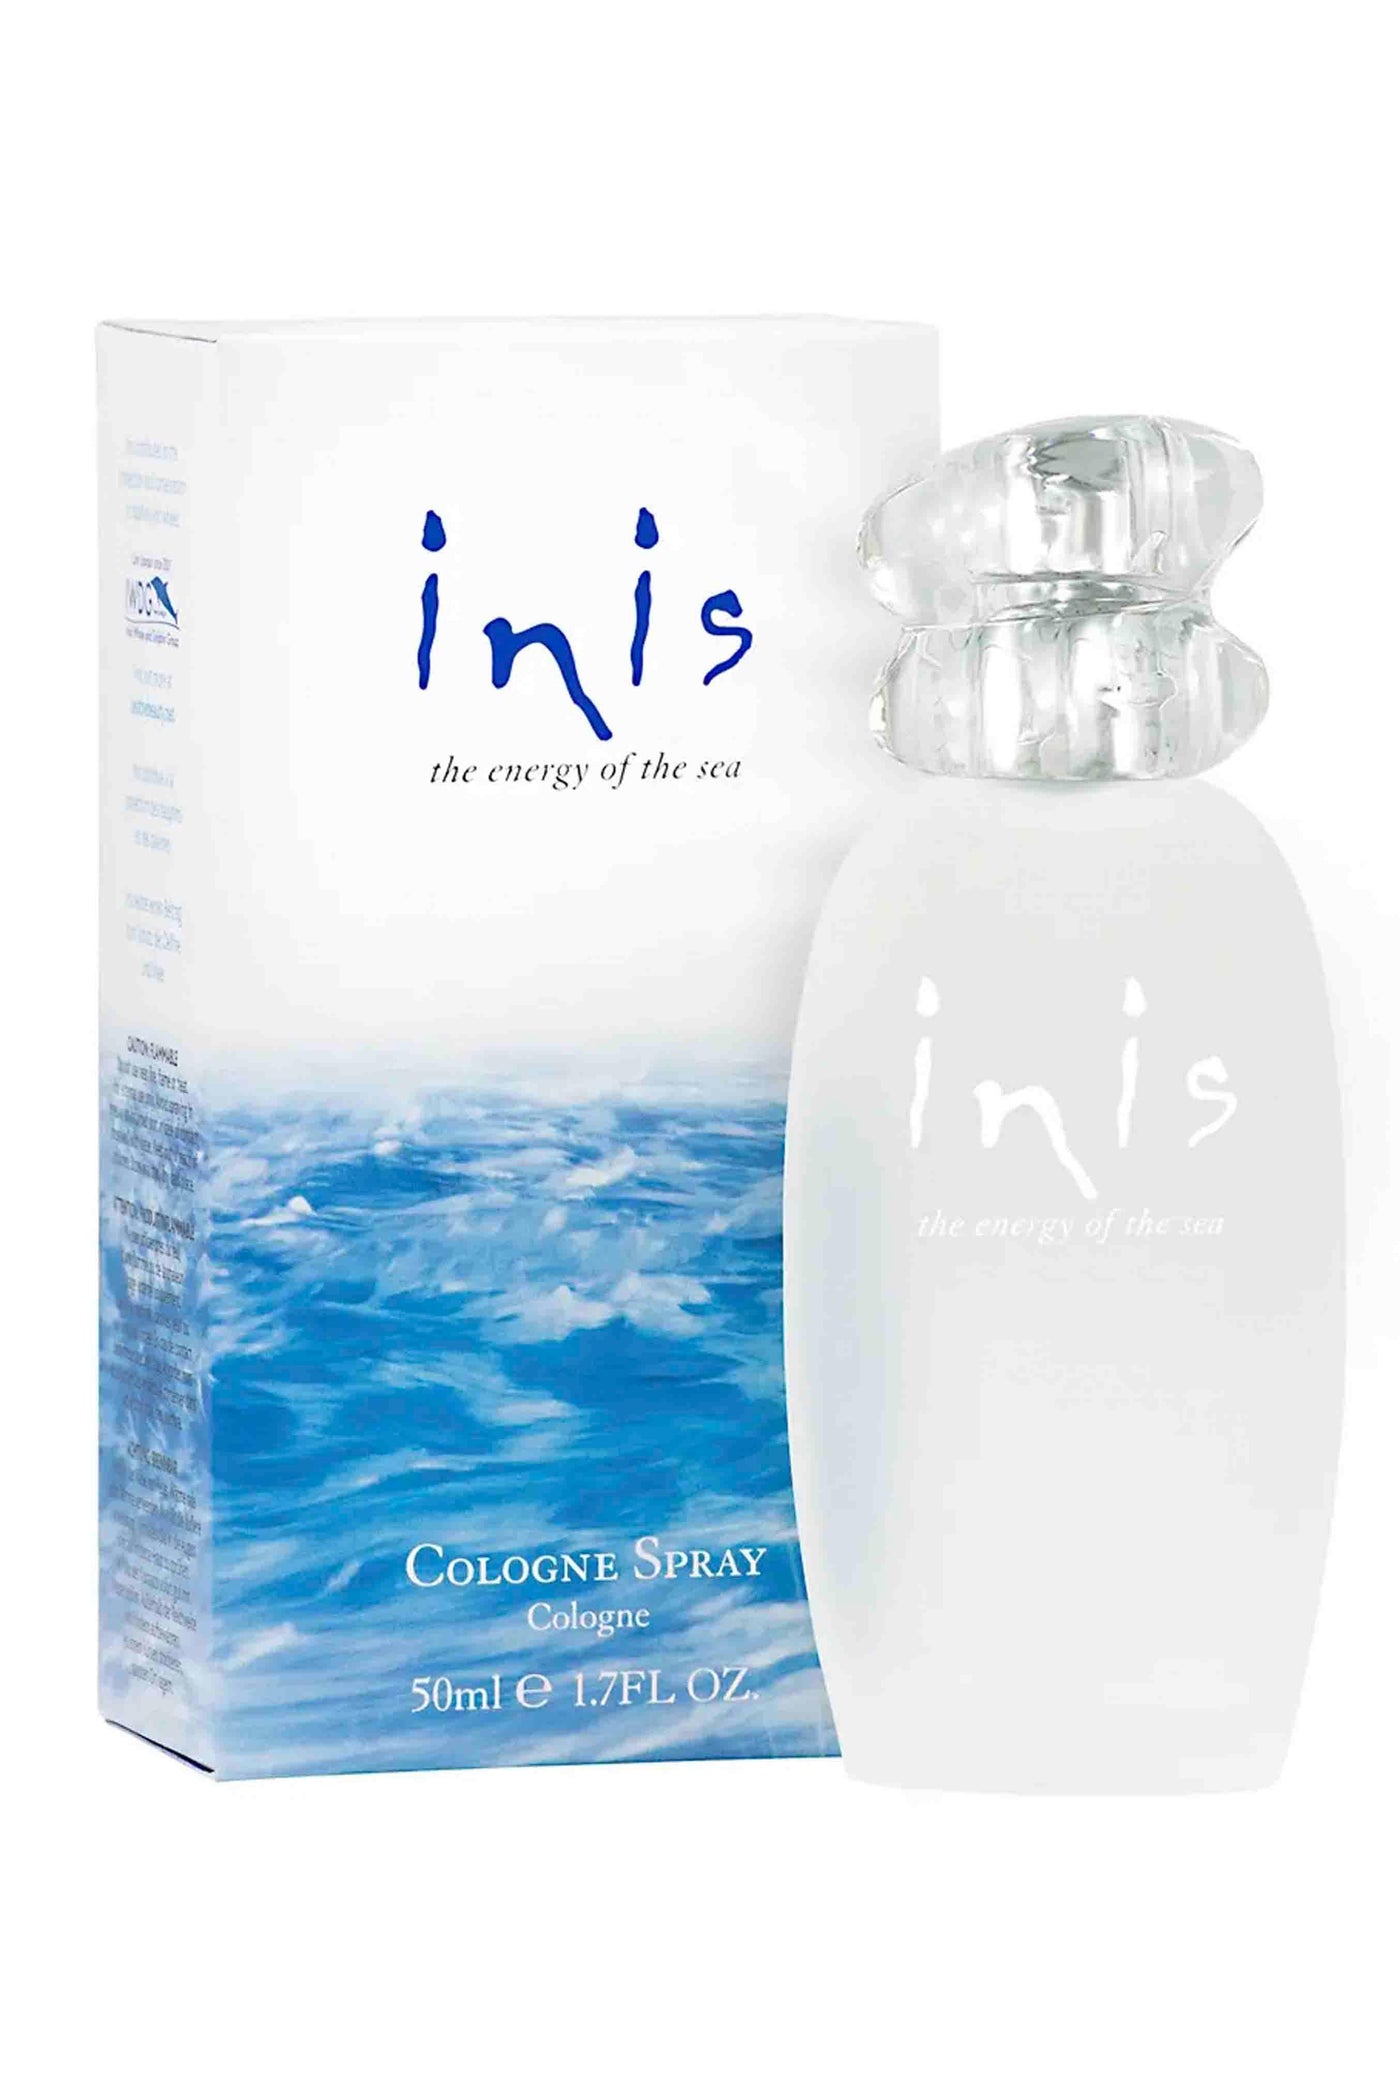 1.7 oz. Cologne Spray bottle by Inis with box